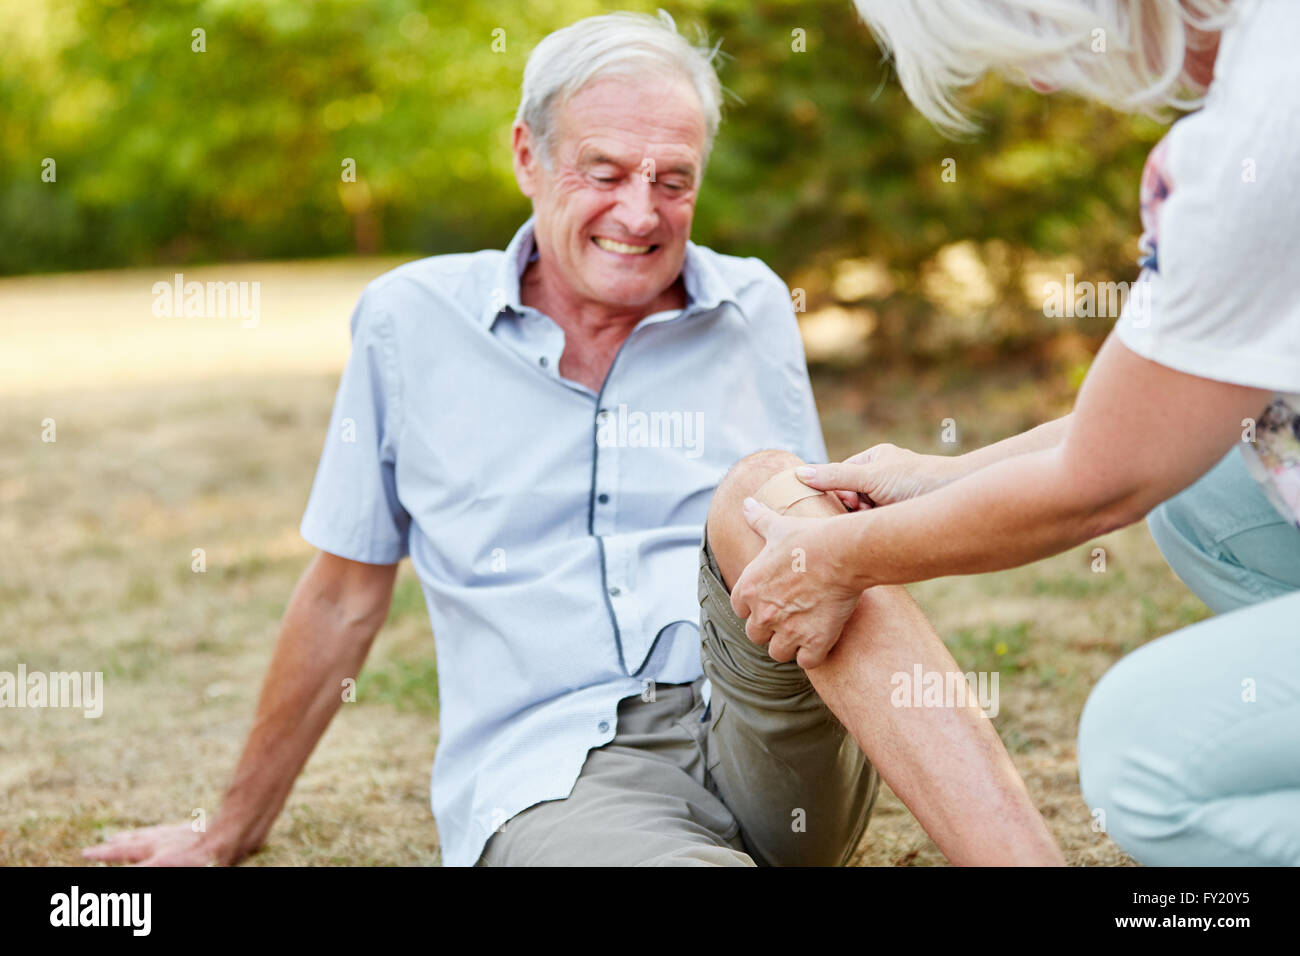 Old man with a knee injury gets plaster on his knee Stock Photo